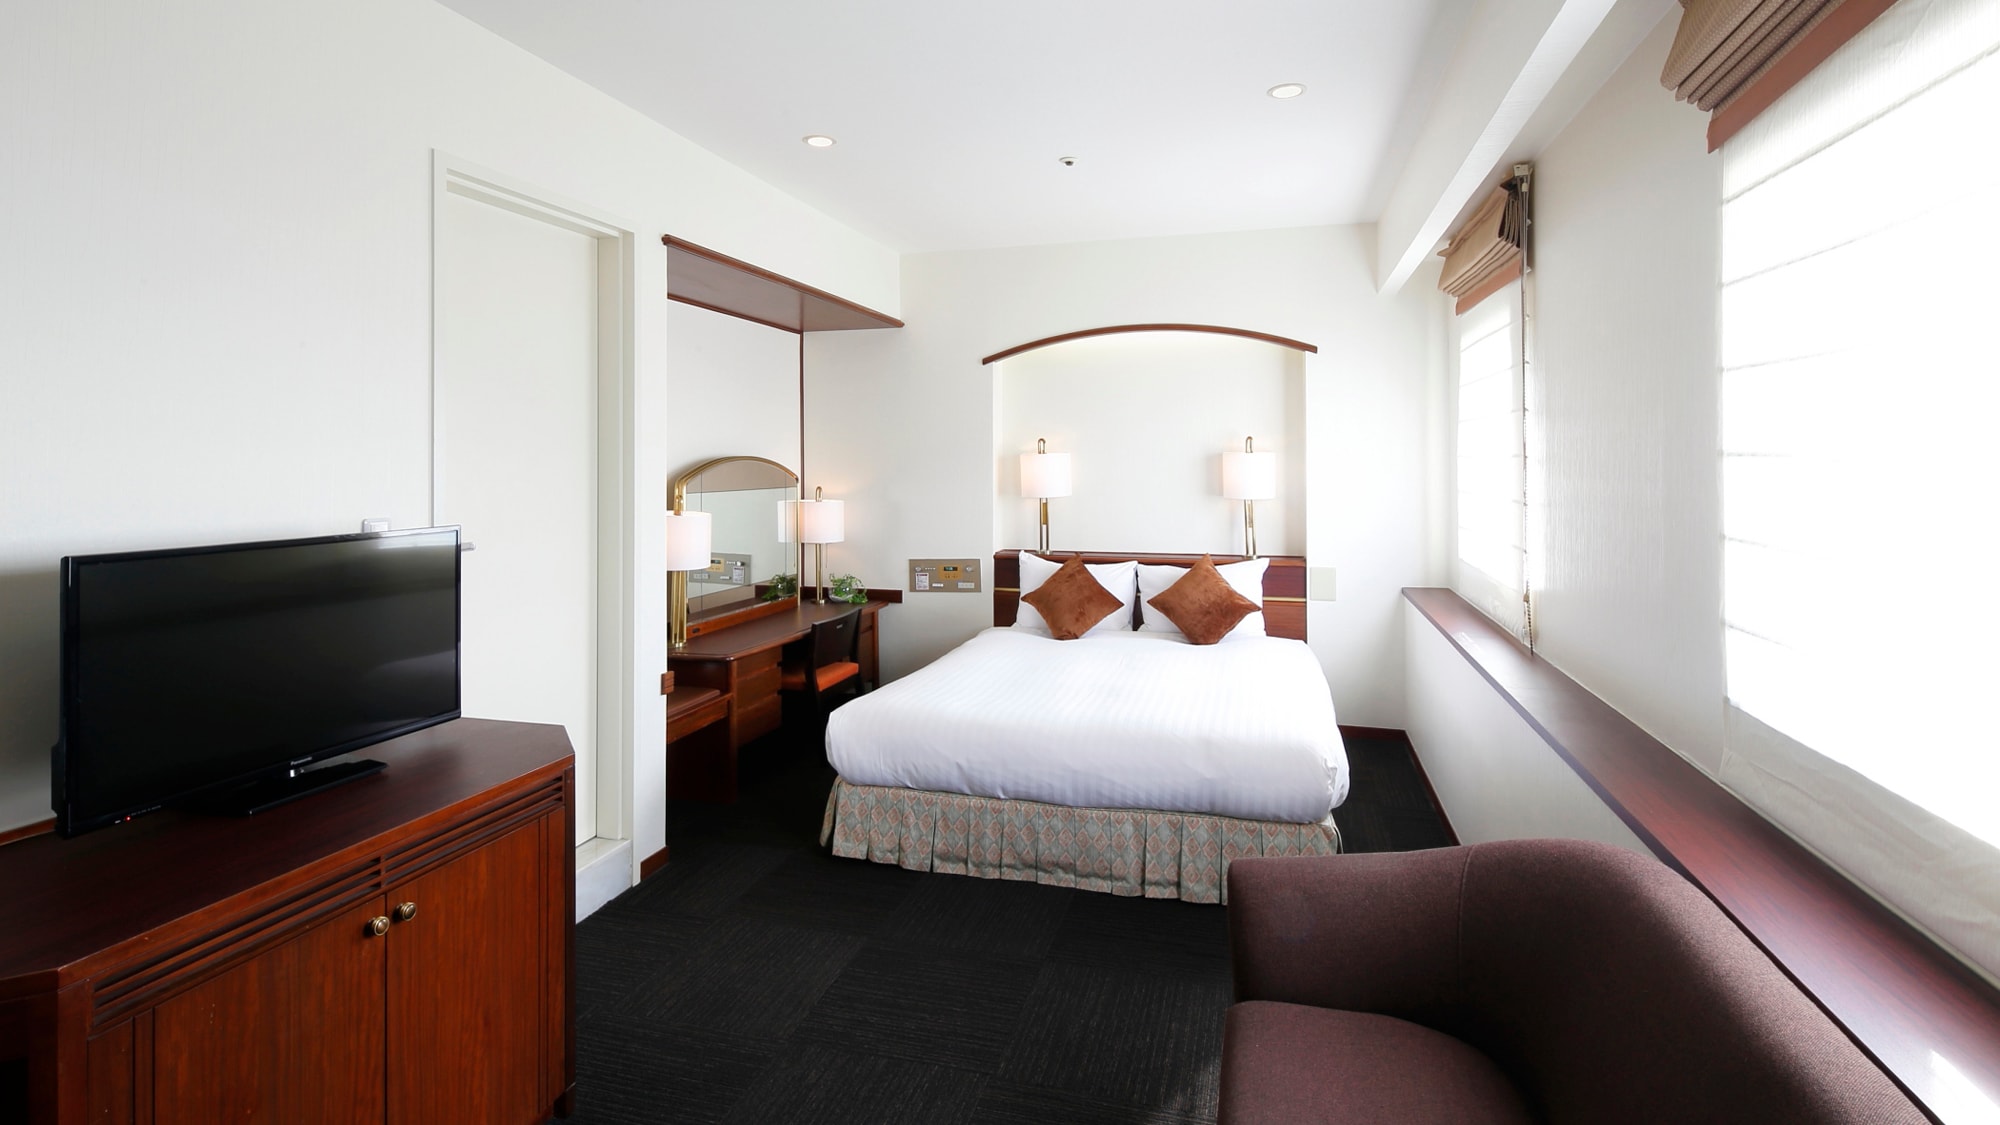 Deluxe double room (only one room in the building, top floor, sea side, 33㎡) Reservations can be made by phone.